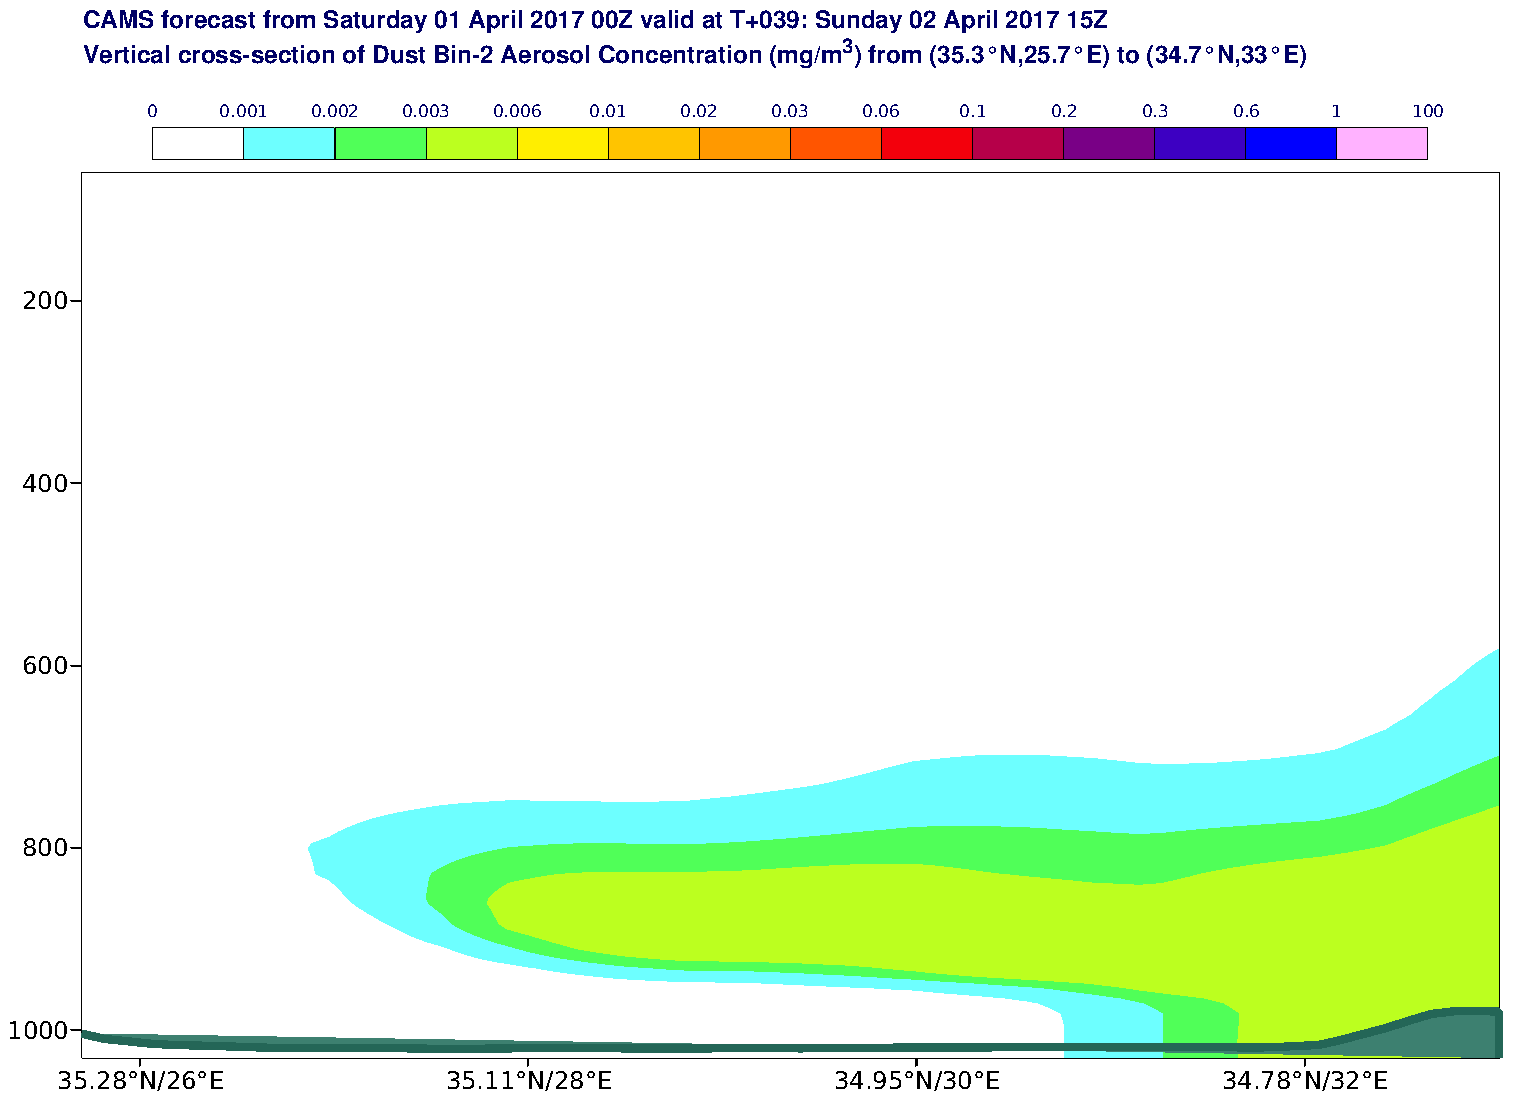 Vertical cross-section of Dust Bin-2 Aerosol Concentration (mg/m3) valid at T39 - 2017-04-02 15:00